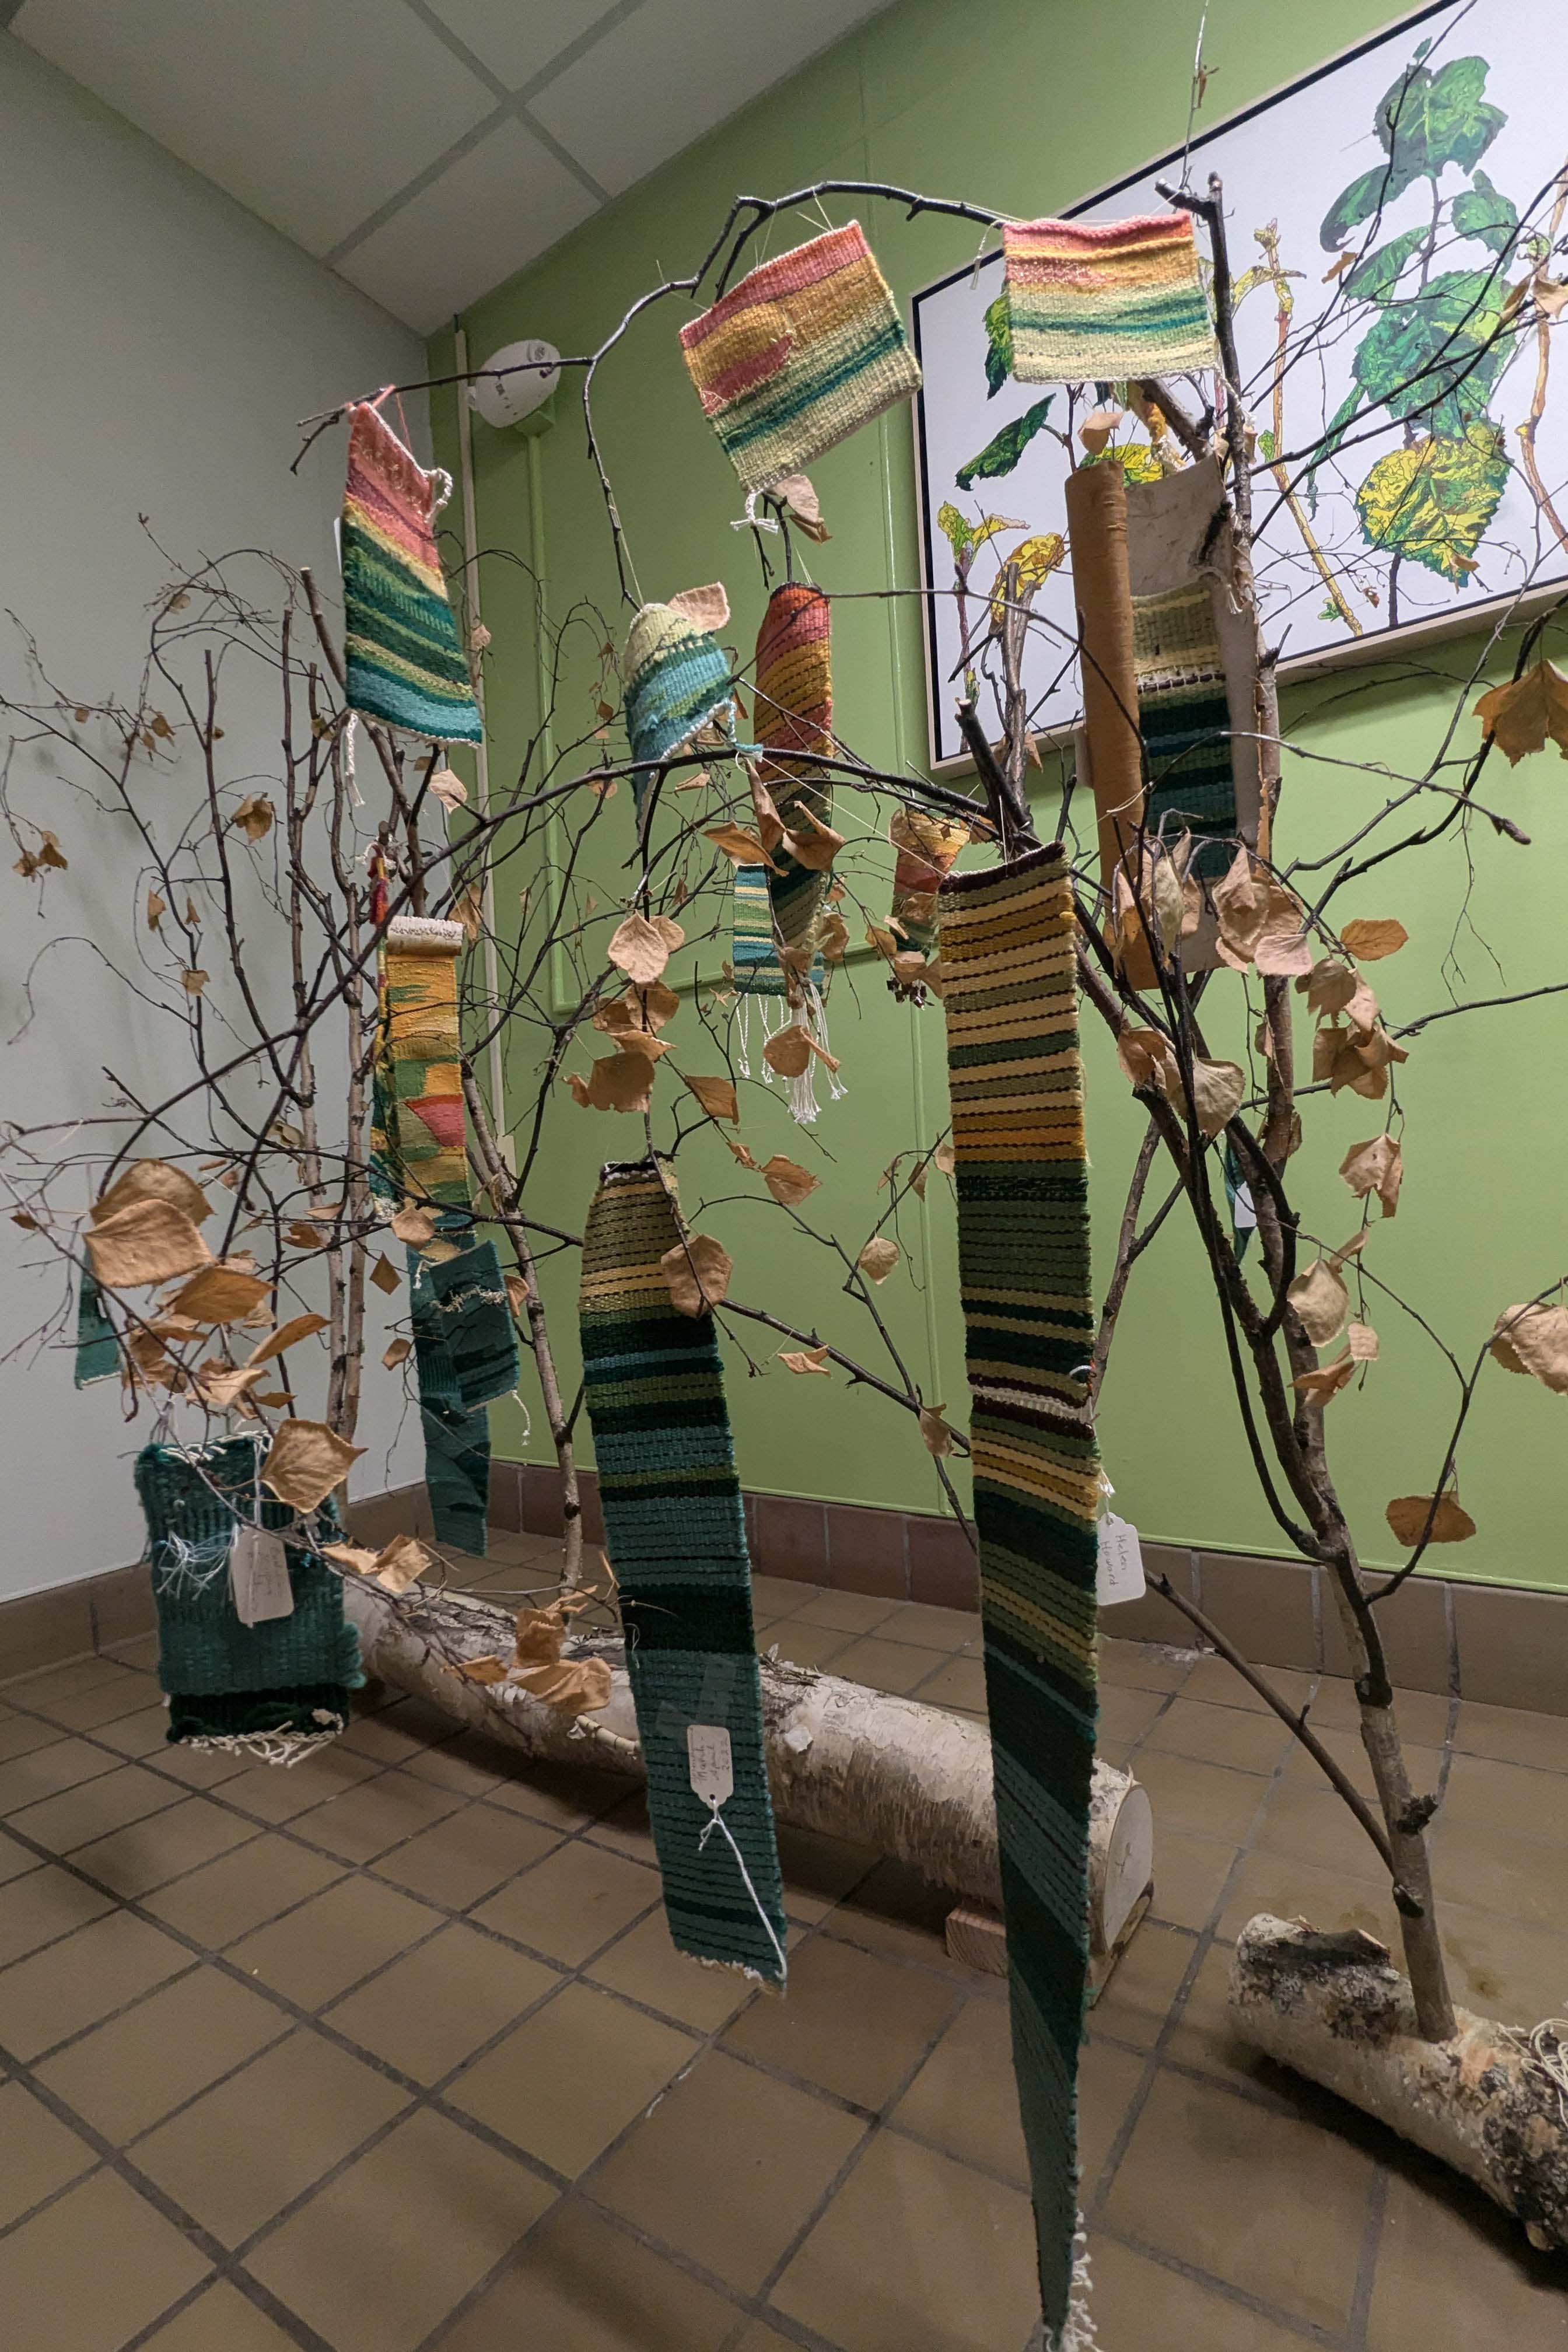 Colorful woven strips hang on birch branches. These art pieces were inspired by climate data, with each color yarn representing the number of degrees different from 32 degrees F